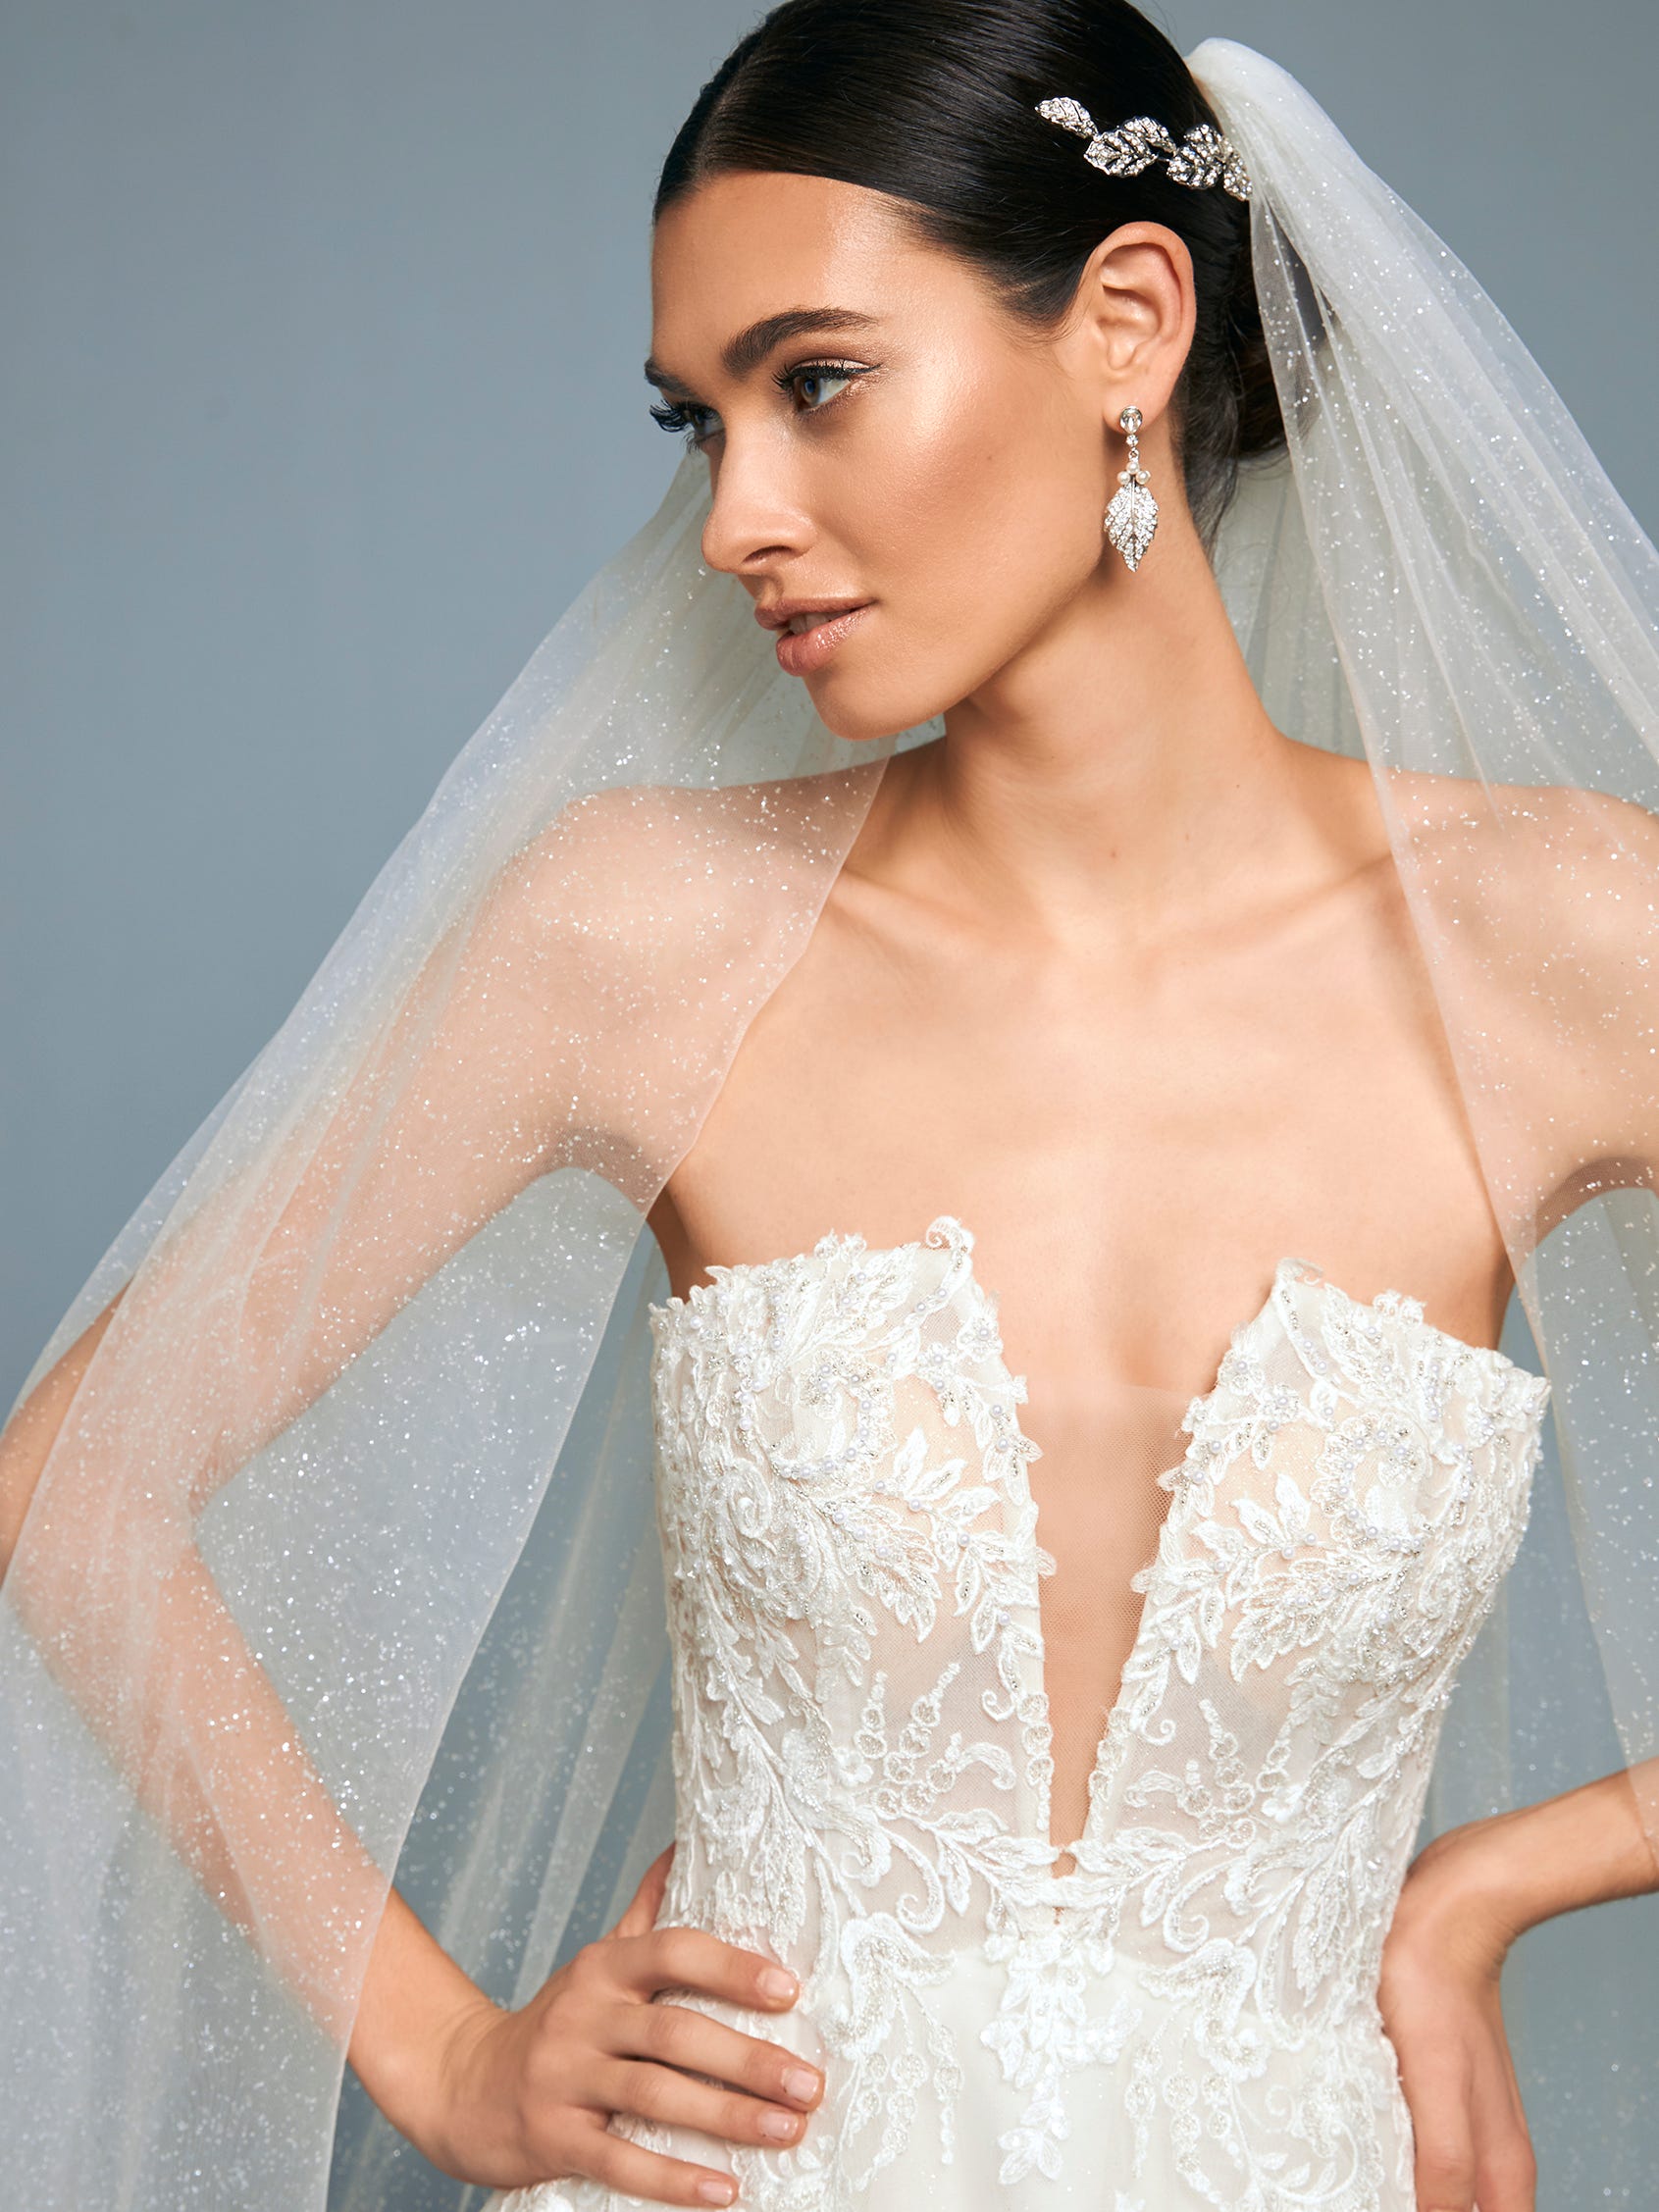 THE BRIDAL VEIL APPOINTMENT- WHAT TO EXPECT